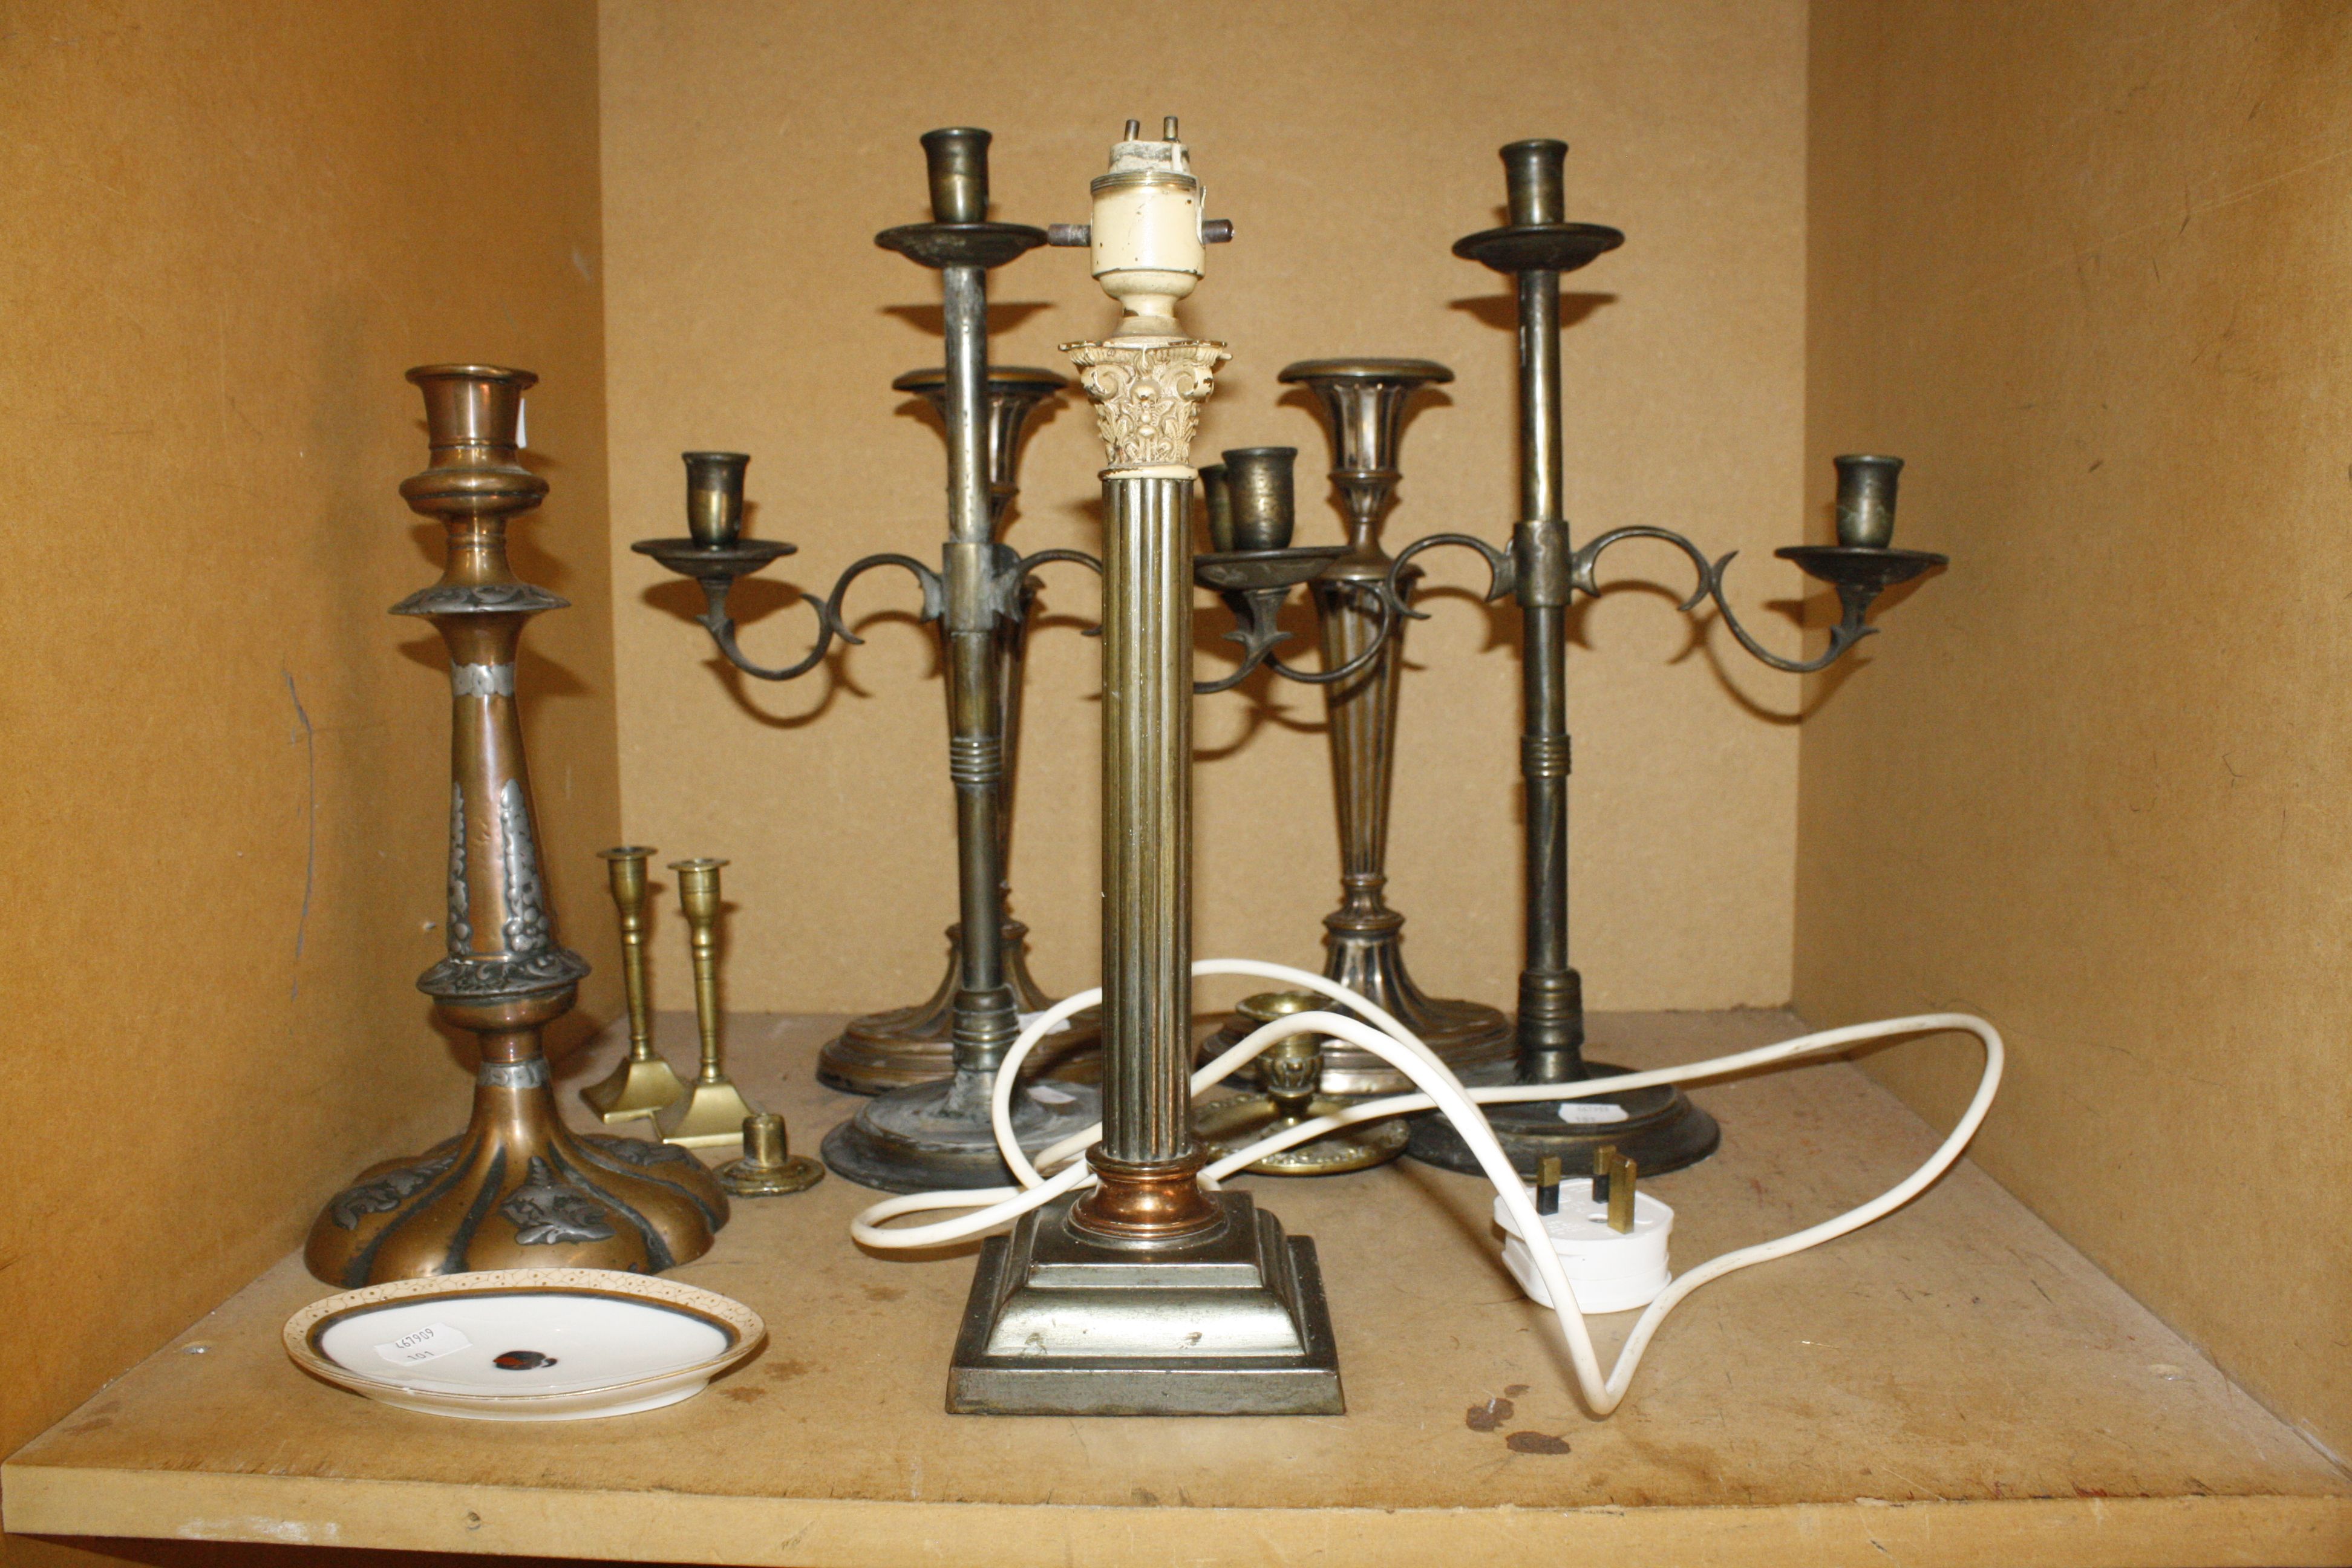 A collection of lighting, including candlesticks, lamps etc (sold as parts)